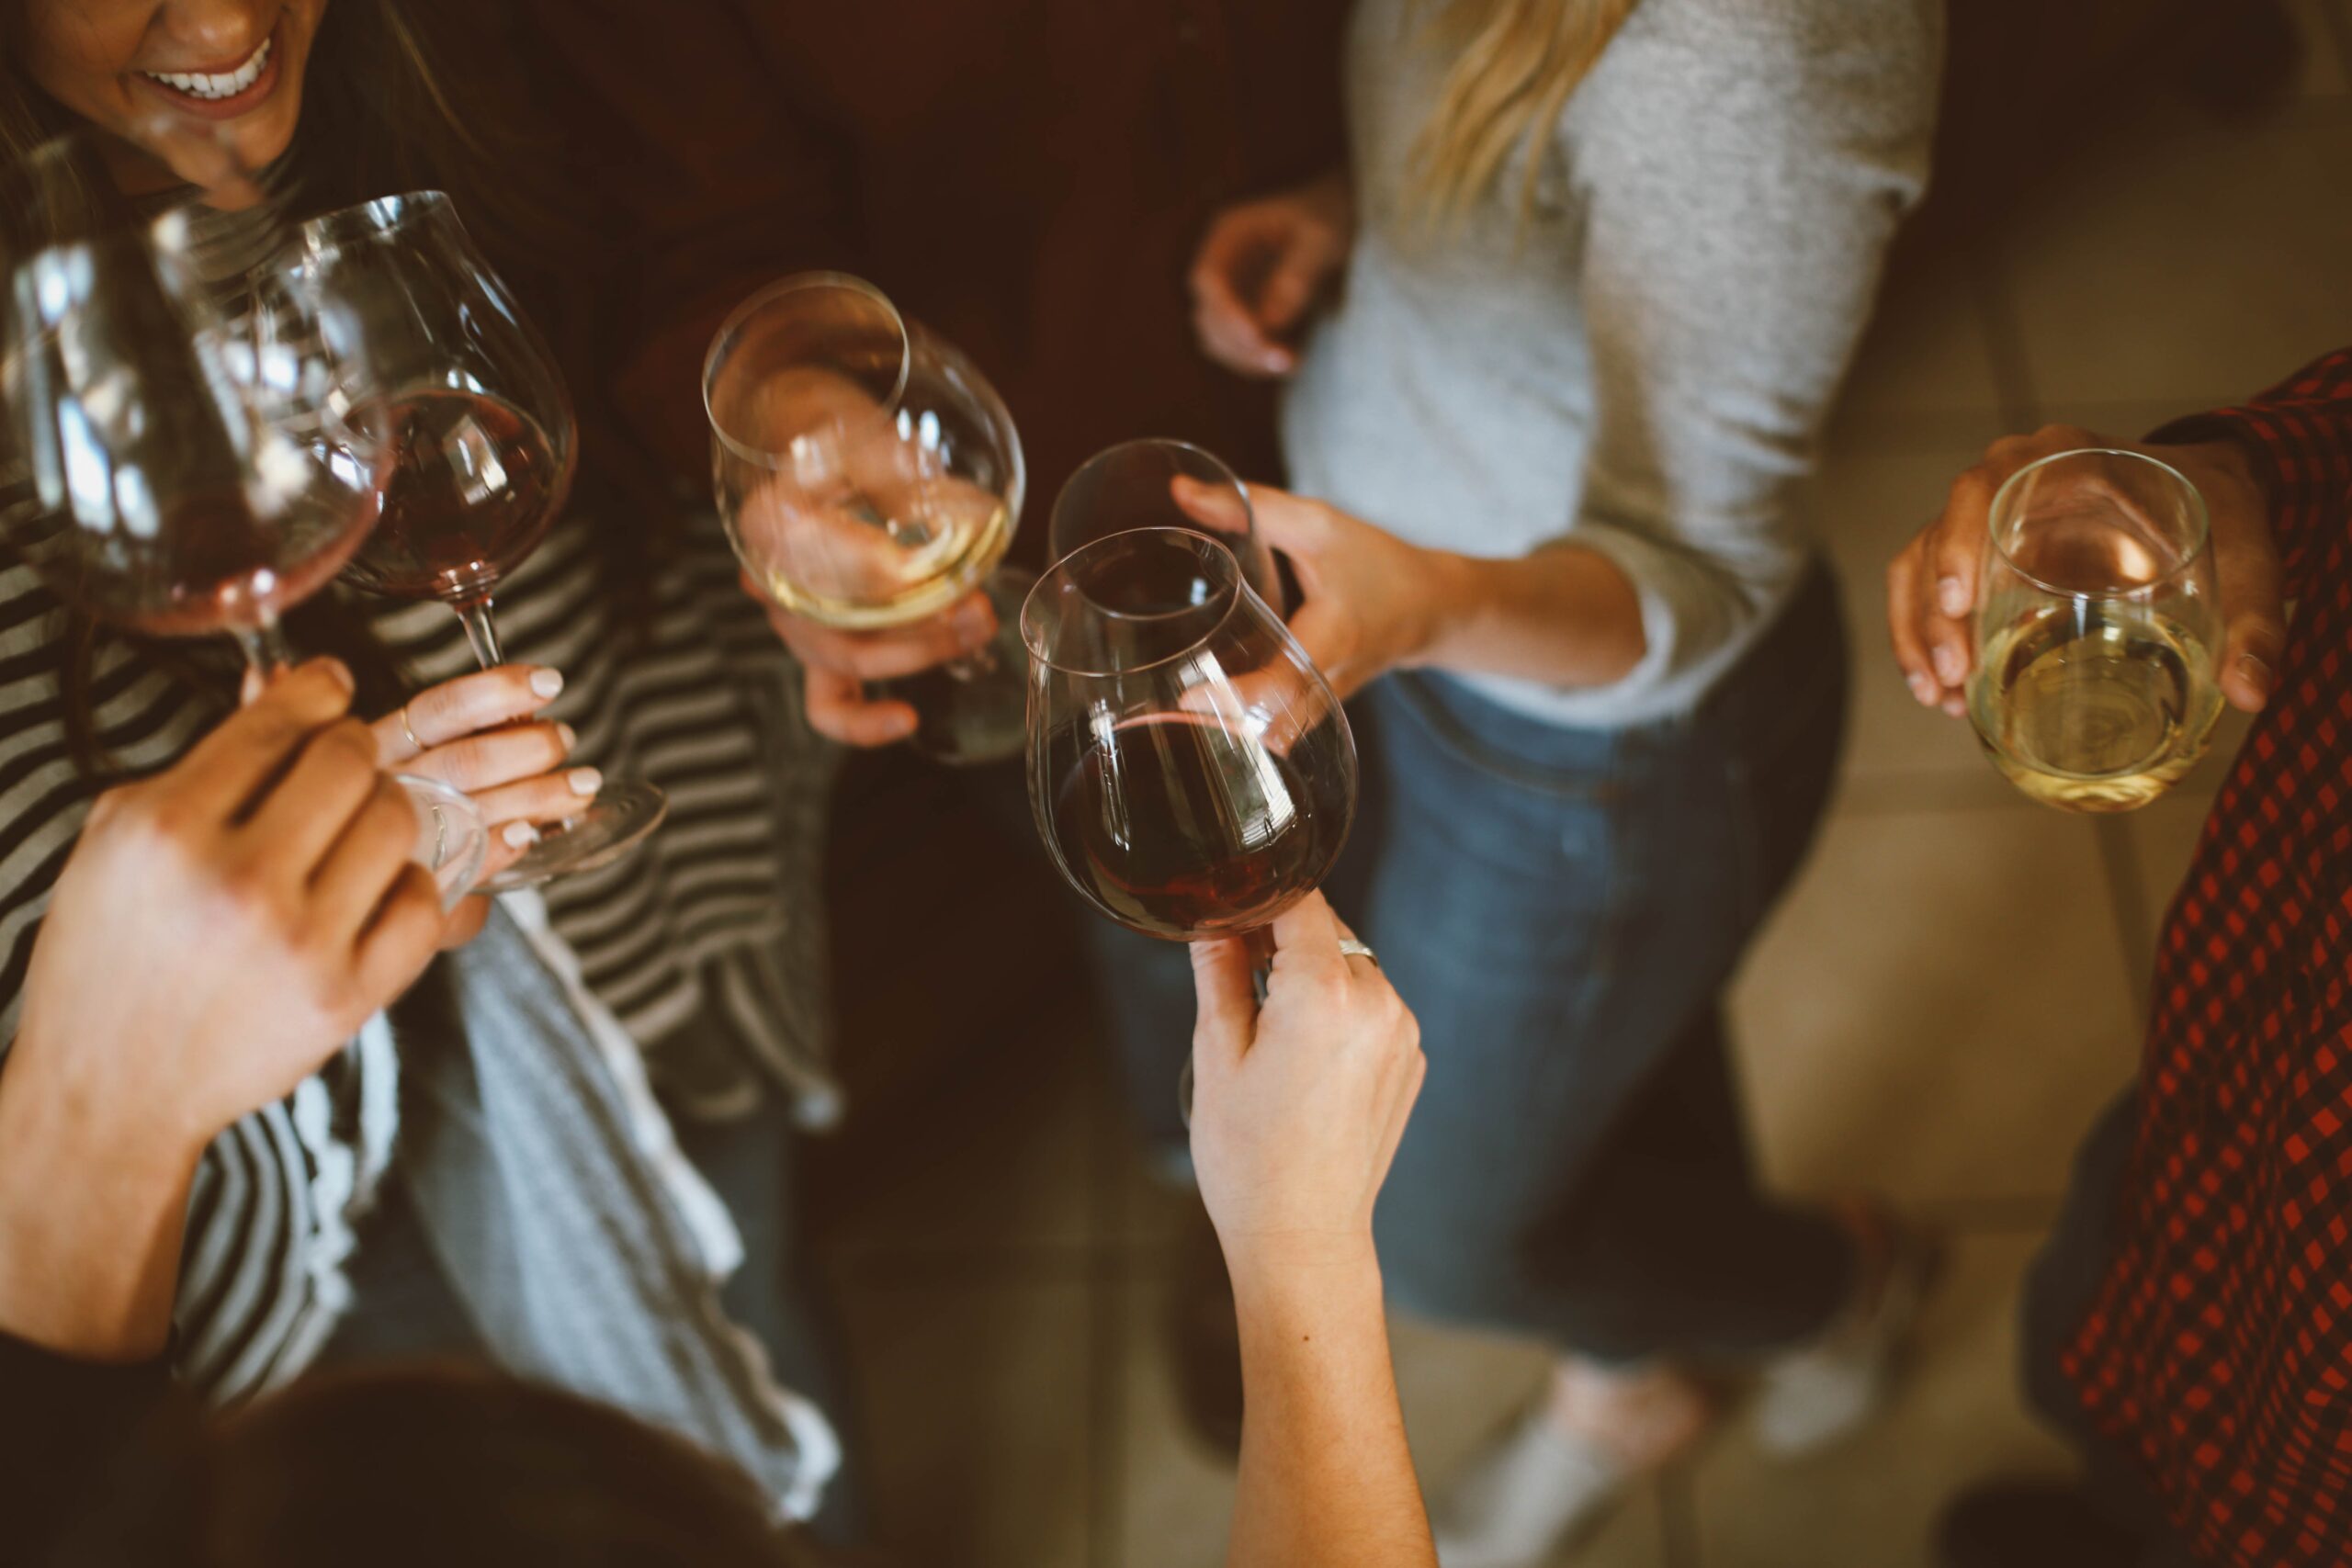 People Drinking, Hand, Cheers, Winery, Wine Glass, Gathering, Celebrate, Smile, Red Wine, White Eine, Fun, Beverage, Happy Students, Girls Night-Out, Fun